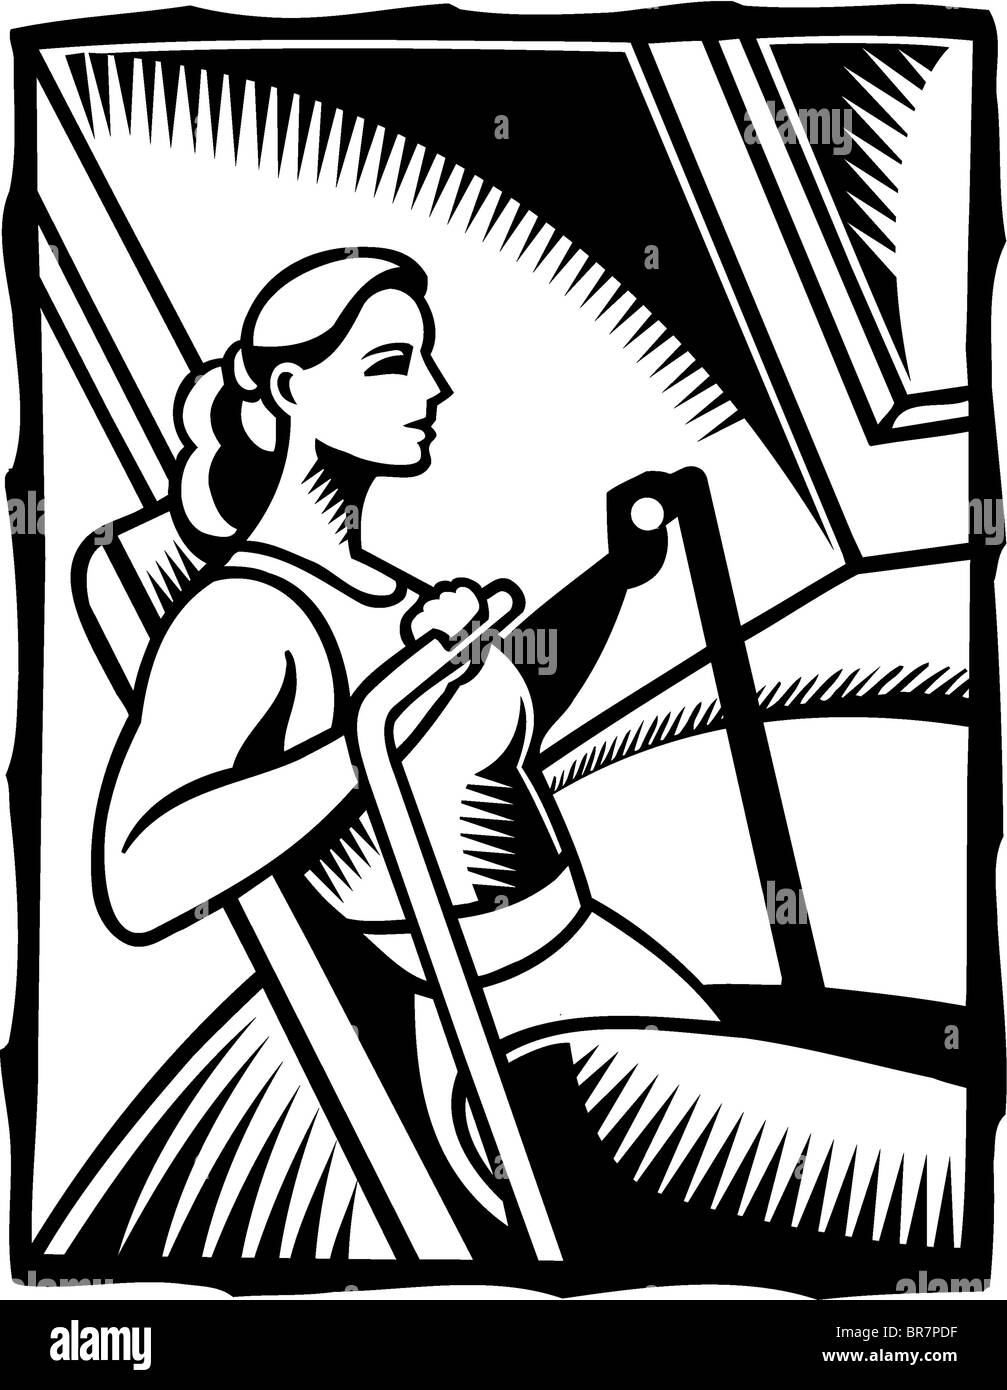 A black and white illustration of a woman exercising on a rowing machine Stock Photo